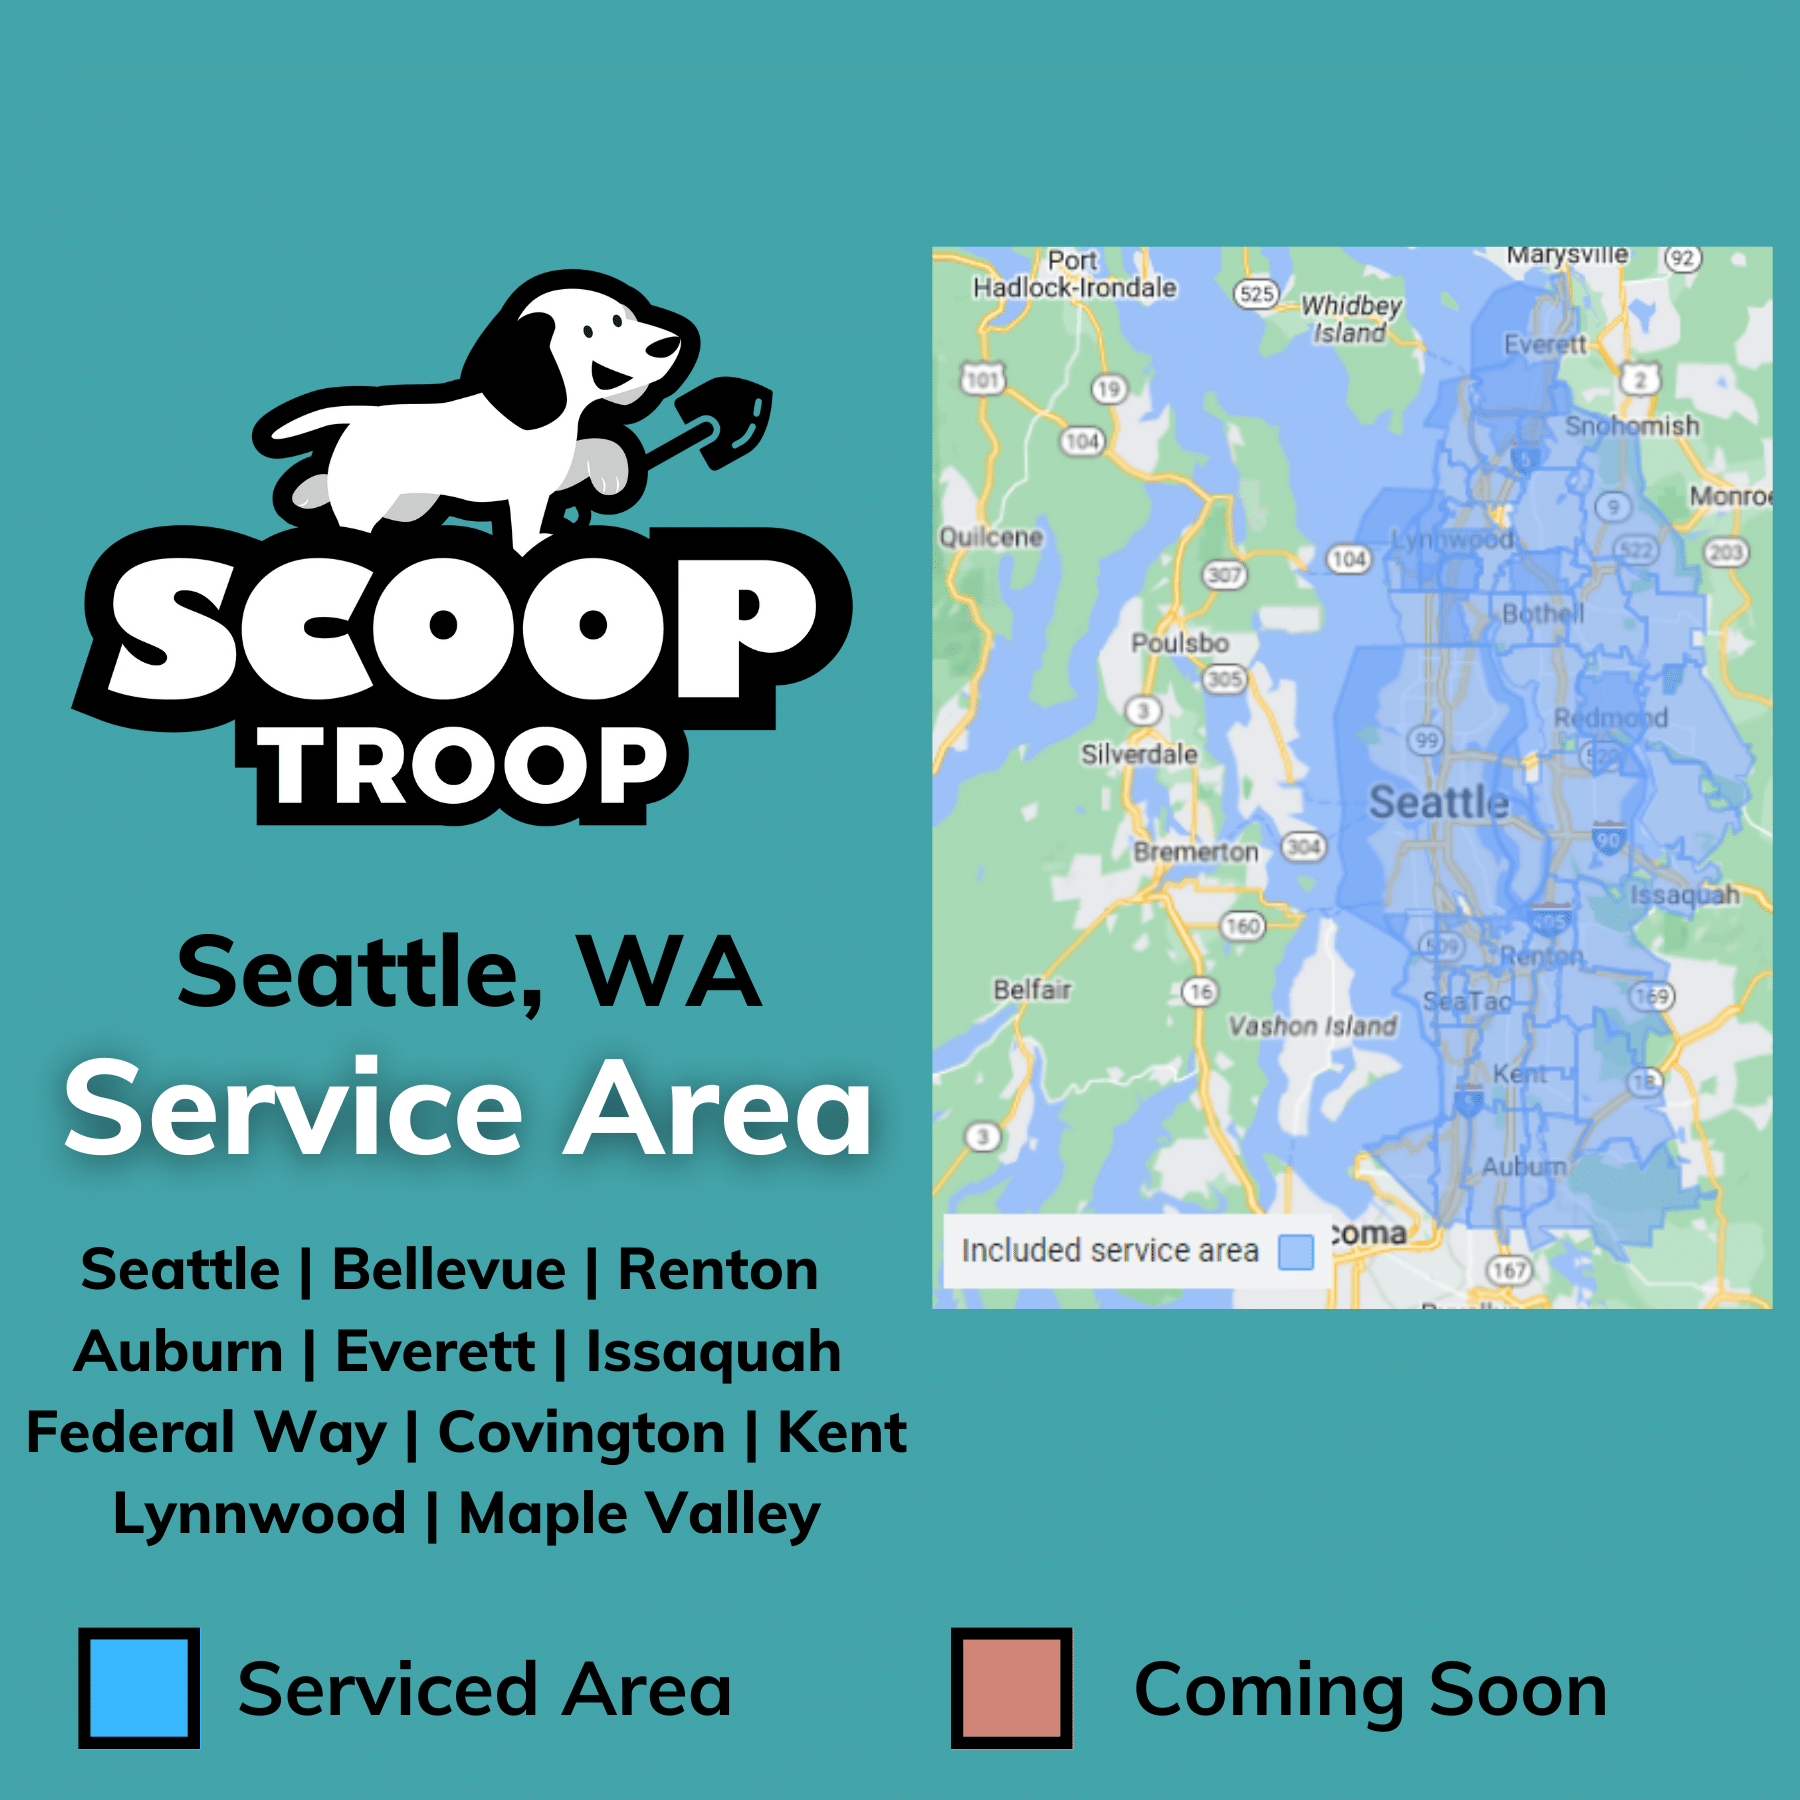 A map of Scoop Troop Seattles service area spanning from Everett, WA through Seattle, Bellevue, Renton, Kent and ending at Auburn and Federal Way.